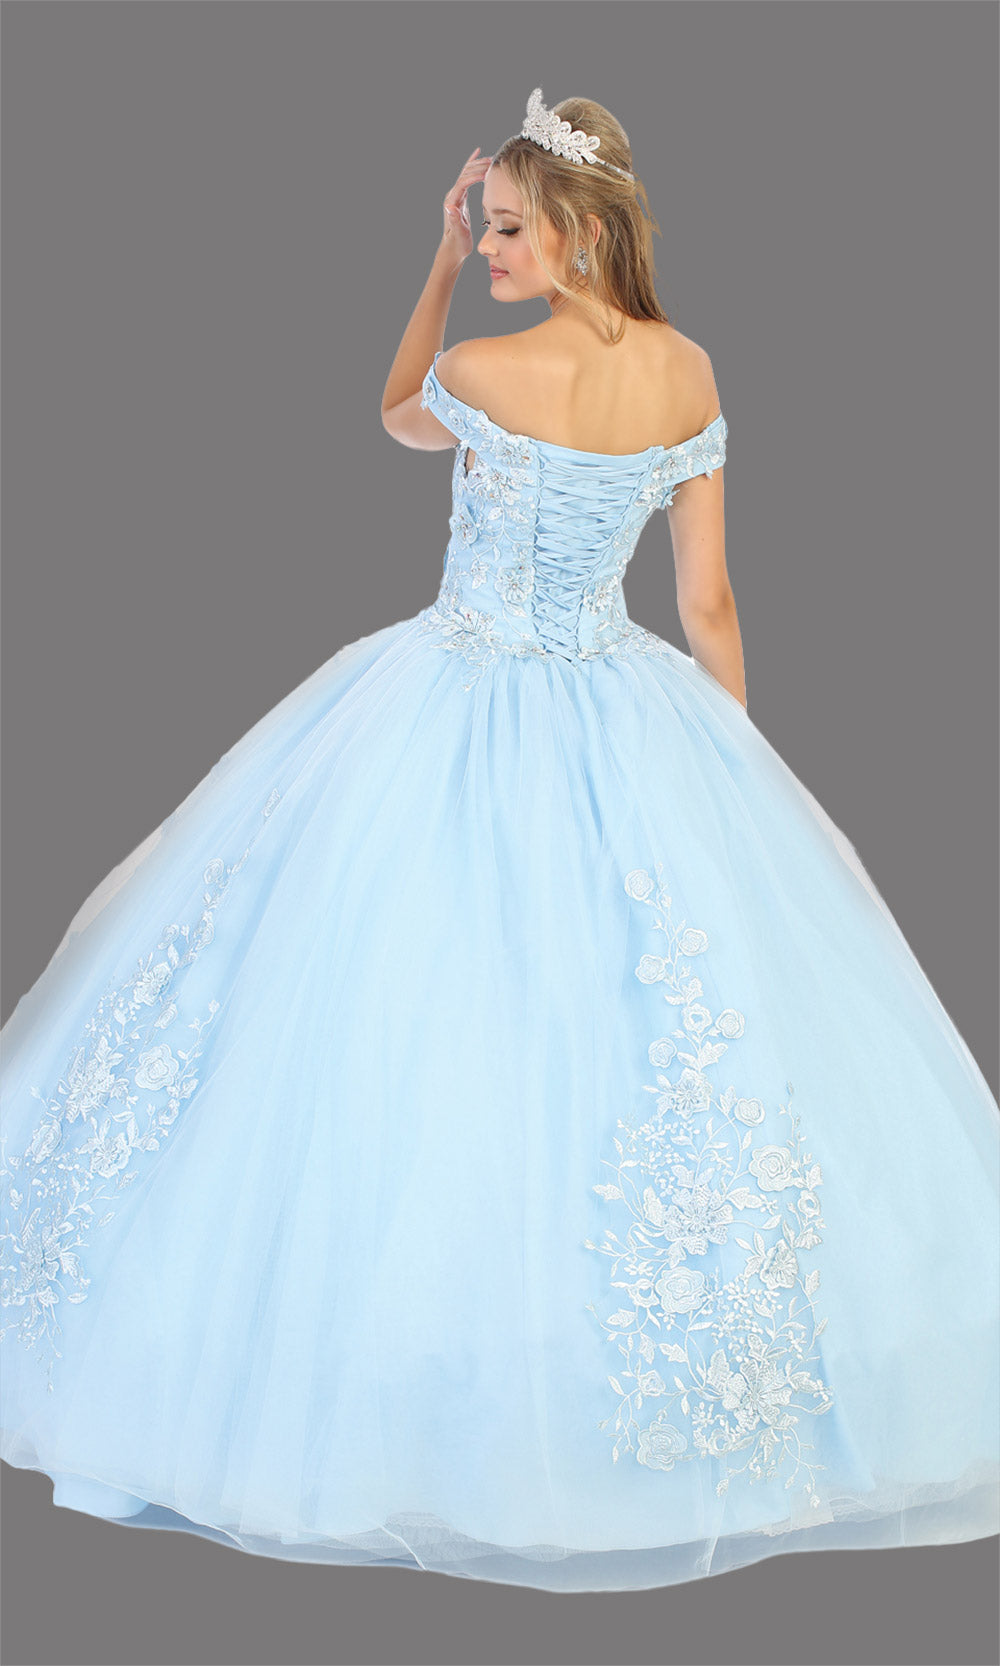 Mayqueen LK136 baby blue quinceanera off shoulder ball gown. Light blue sequin ball gown is perfect for engagement dress, wedding reception, indowestern party gown, sweet 16, debut, sweet 15, sweet 18. Plus sizes available for ballgowns-b.jpg